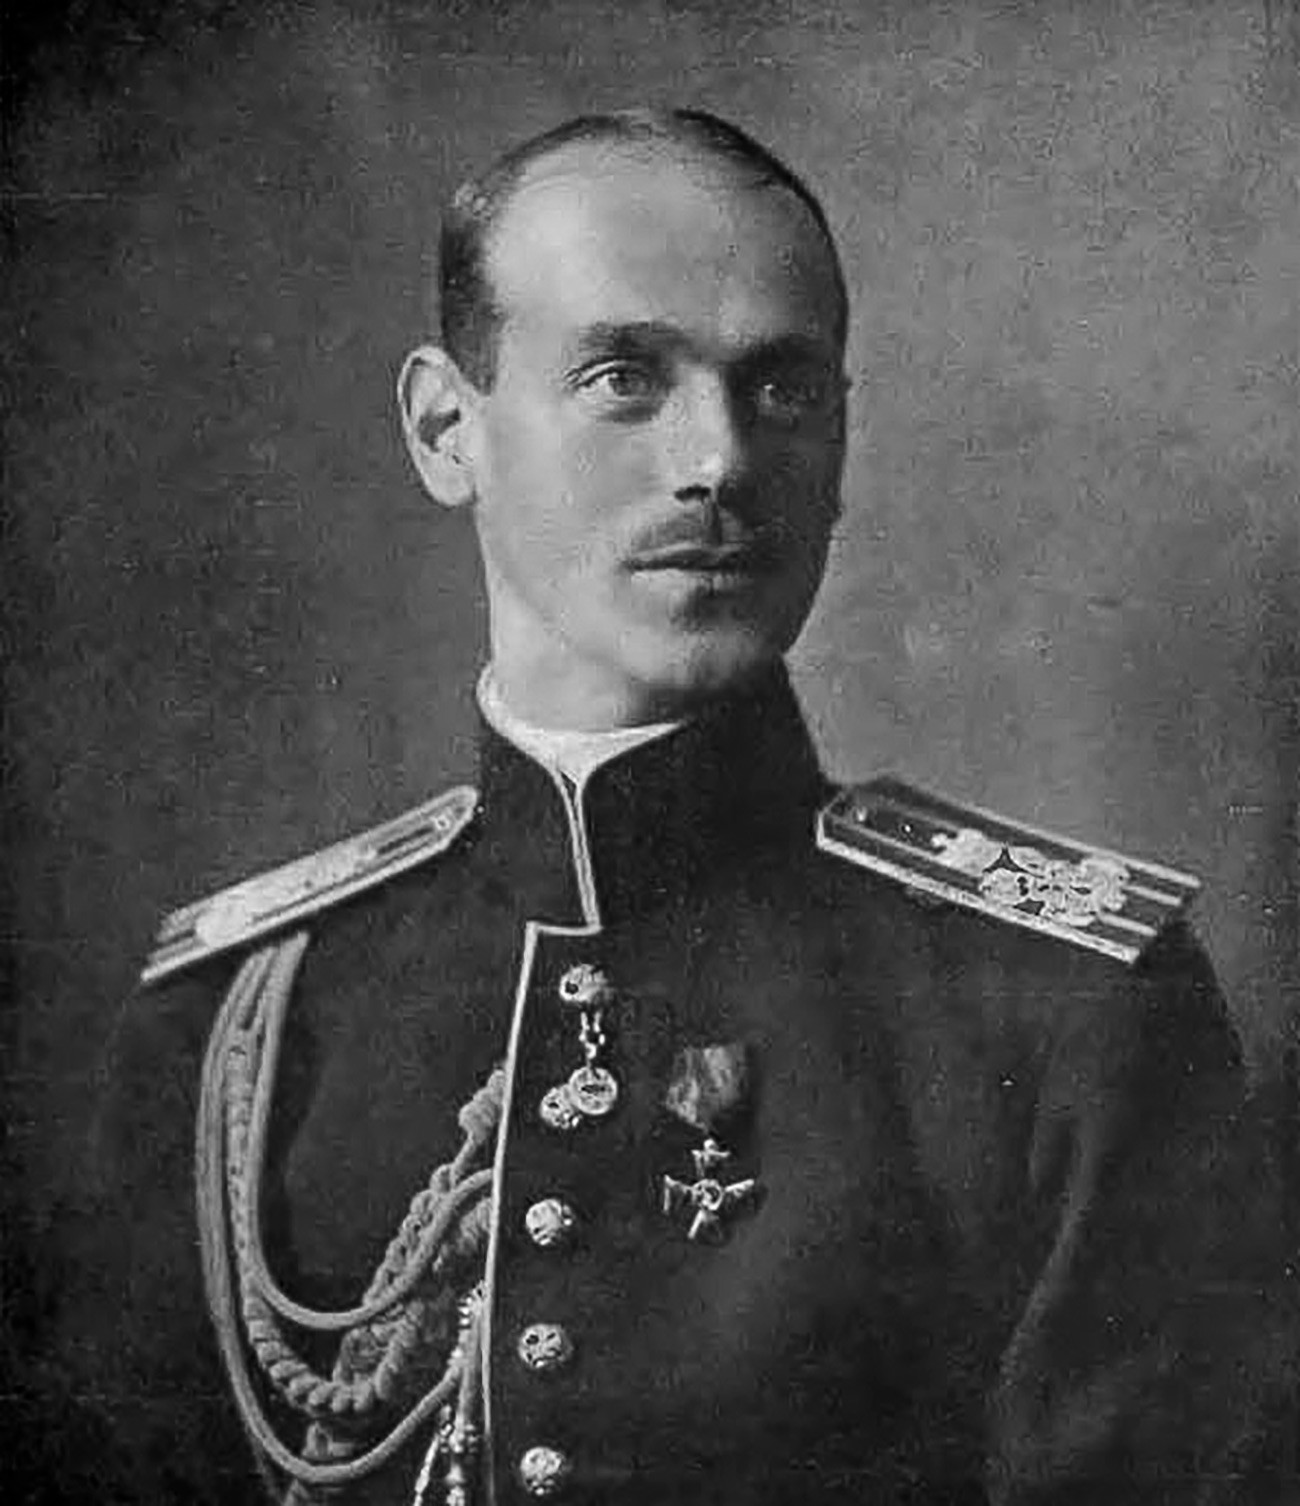 Russian Grand Duke Mikhail Alexandrovich, the last tsar's younger brother.